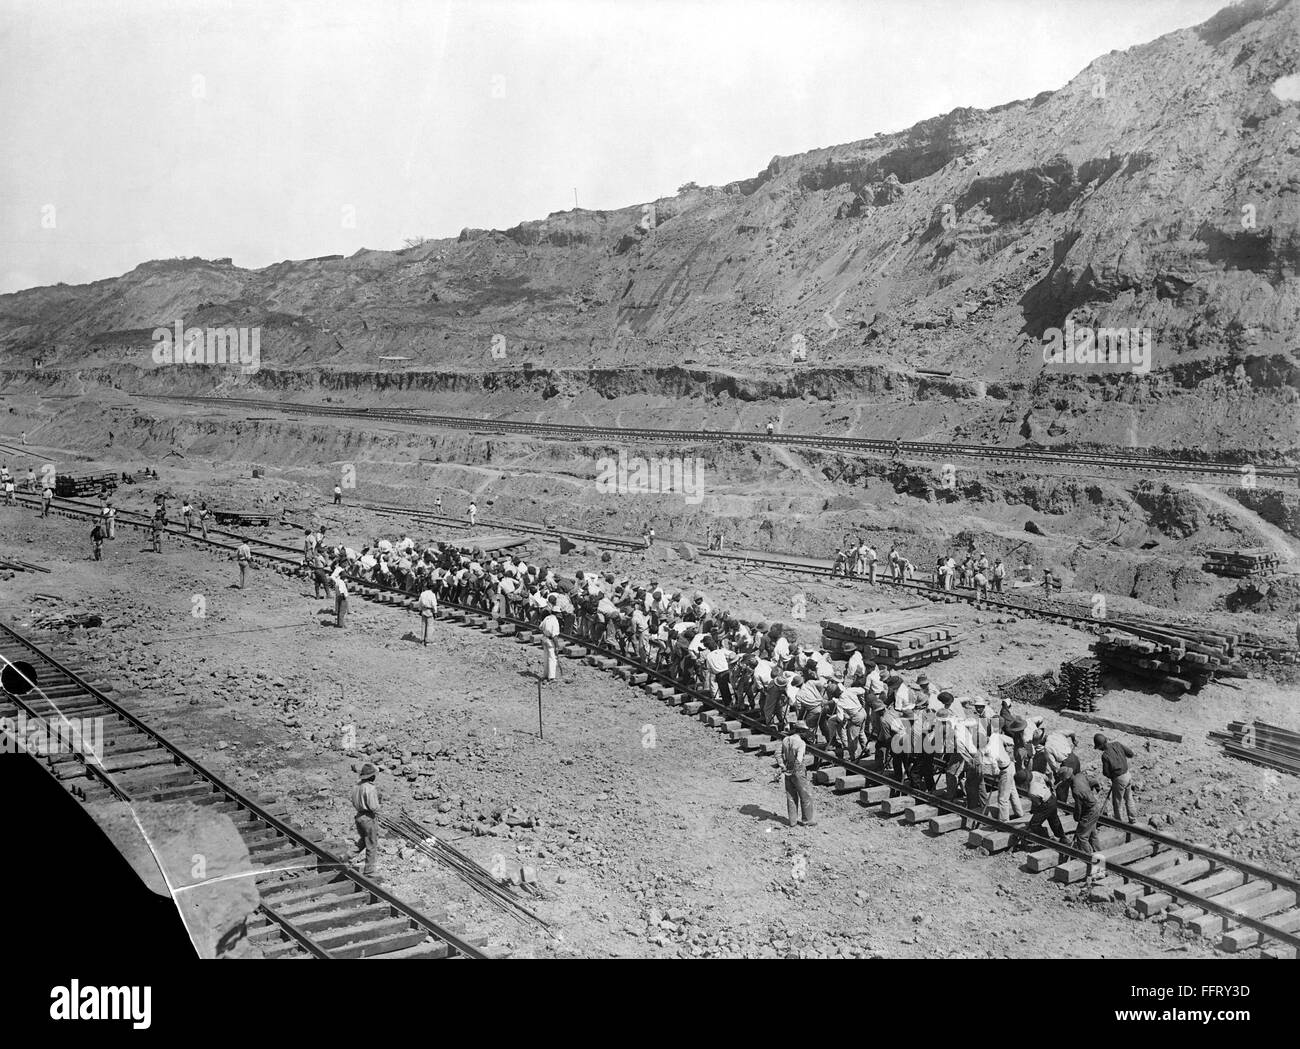 PANAMA: RAILWAY, c1912./nA gang of approximately 150 men shifting track by hand. Photographed by George W. Harris and Martha Ewing, c1912. Stock Photo